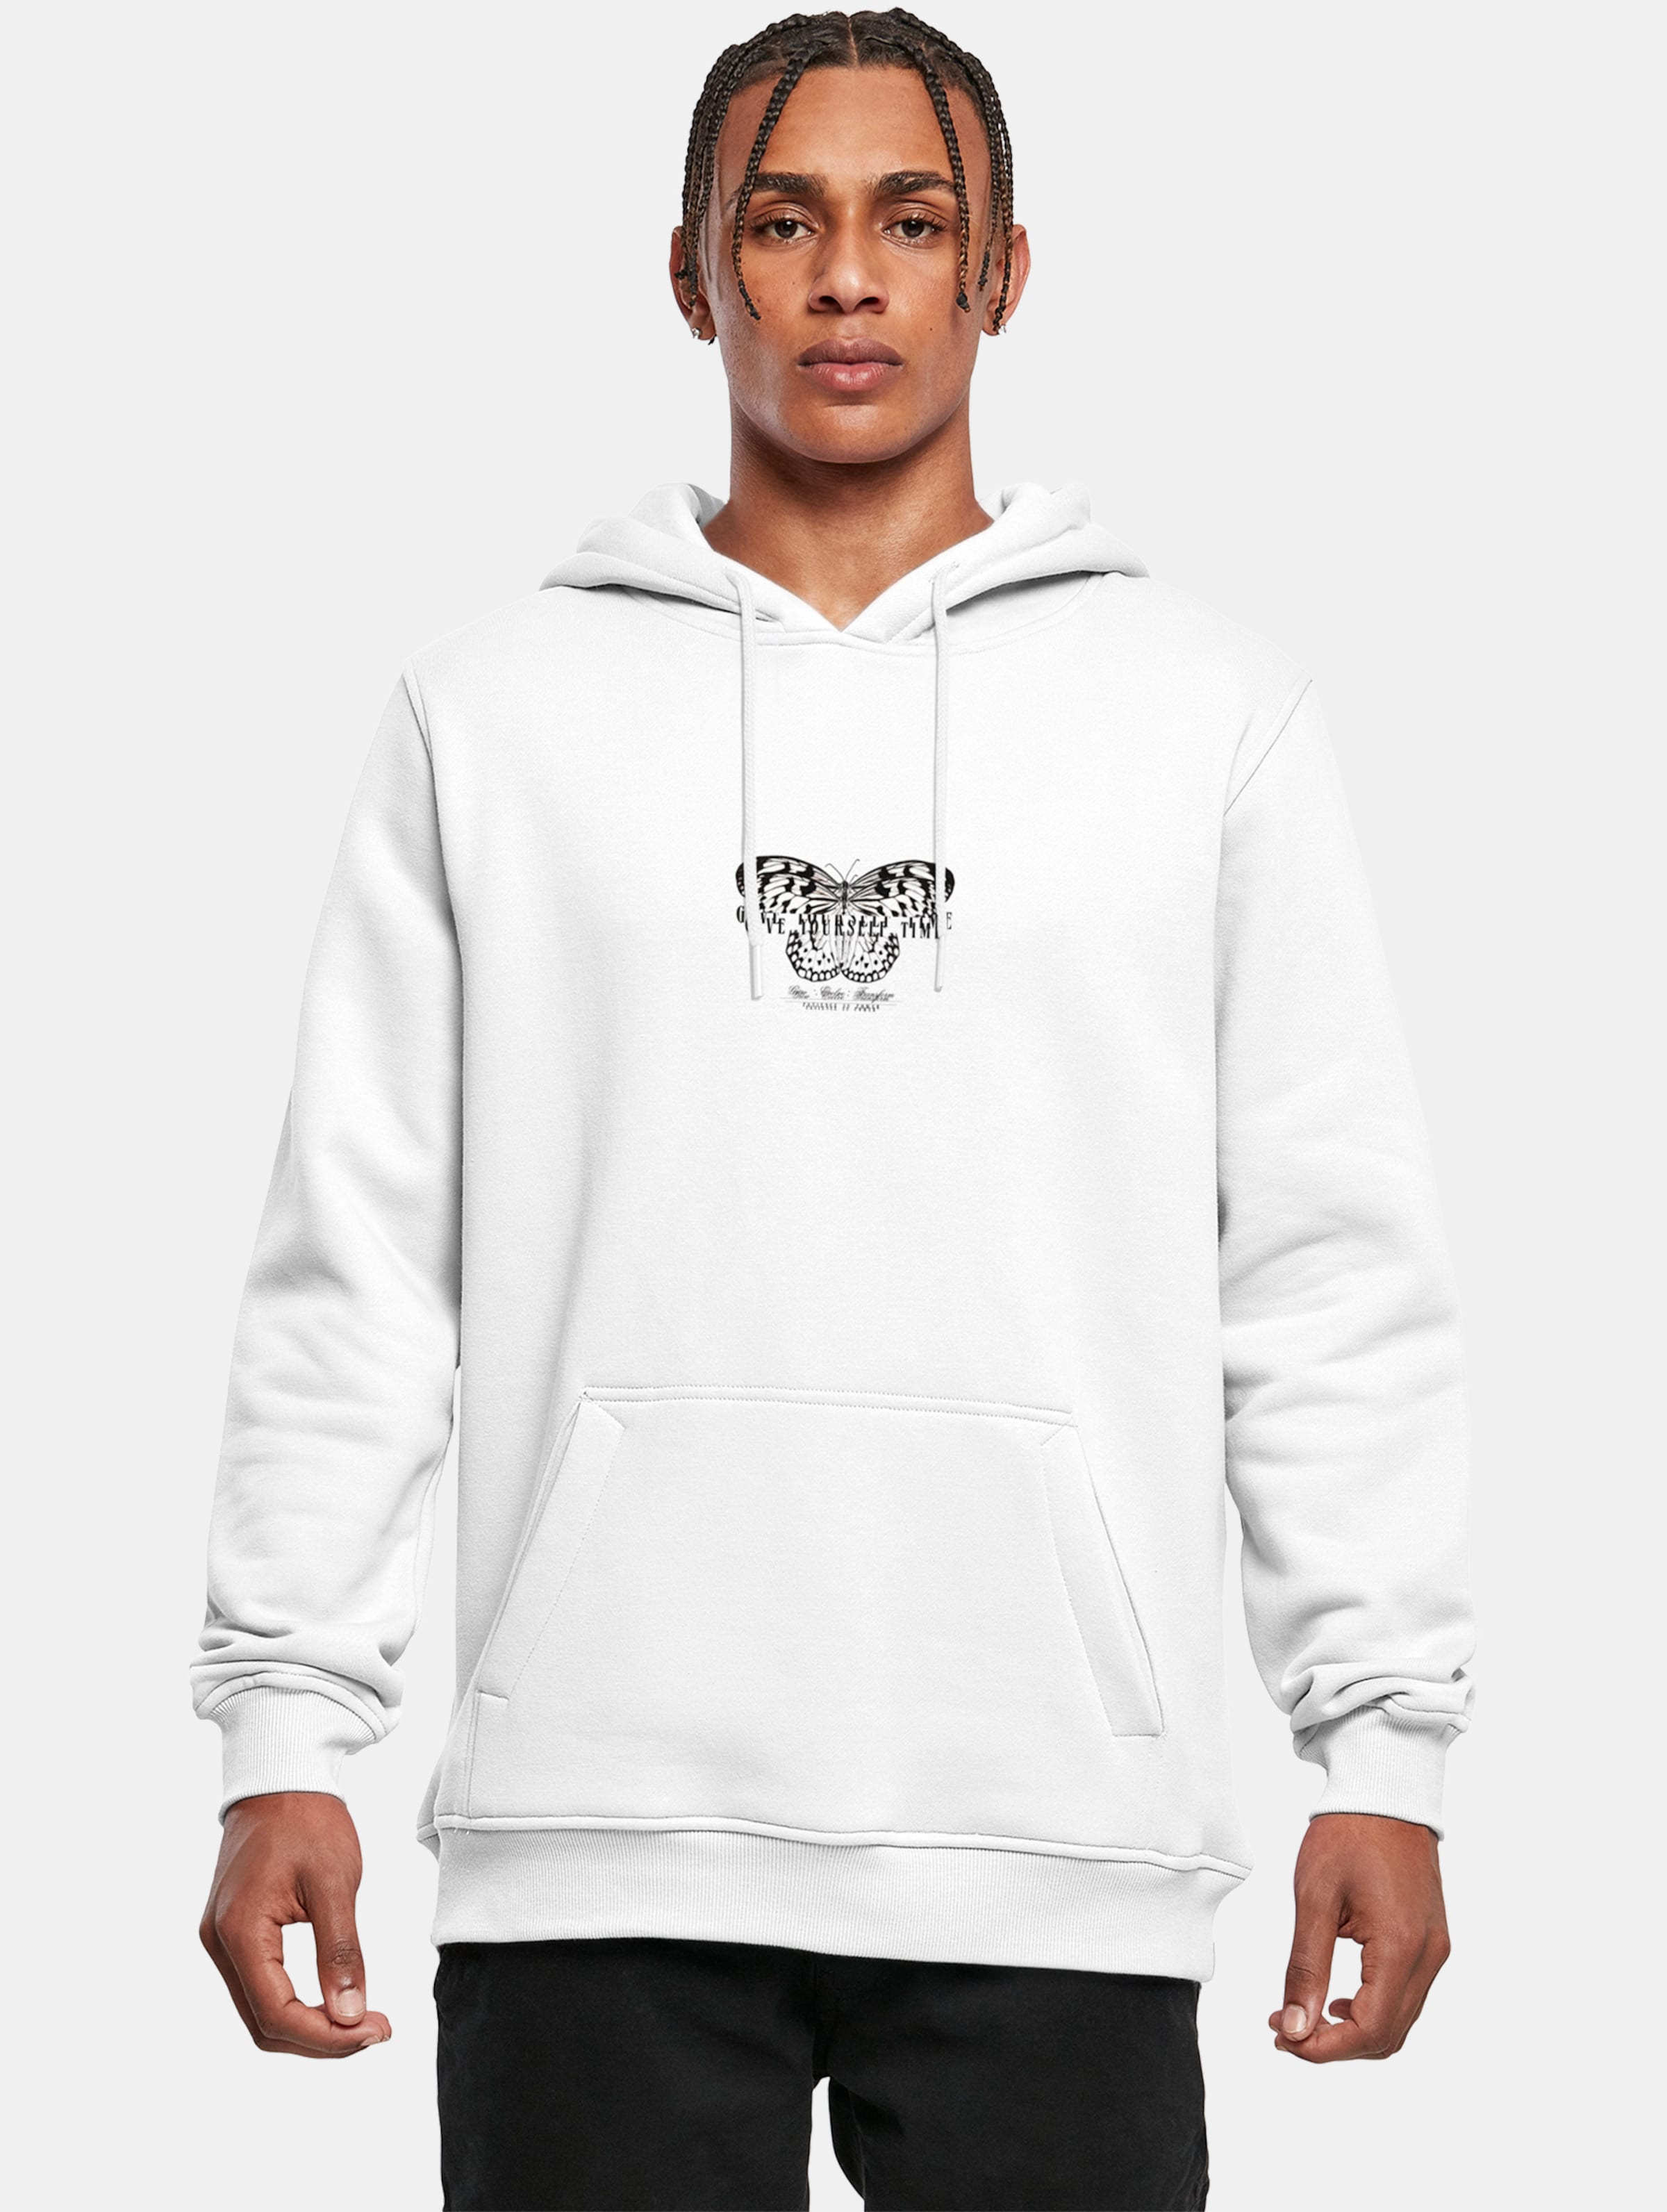 Mister Tee - Give Yourself Time Hoodie/trui - L - Wit